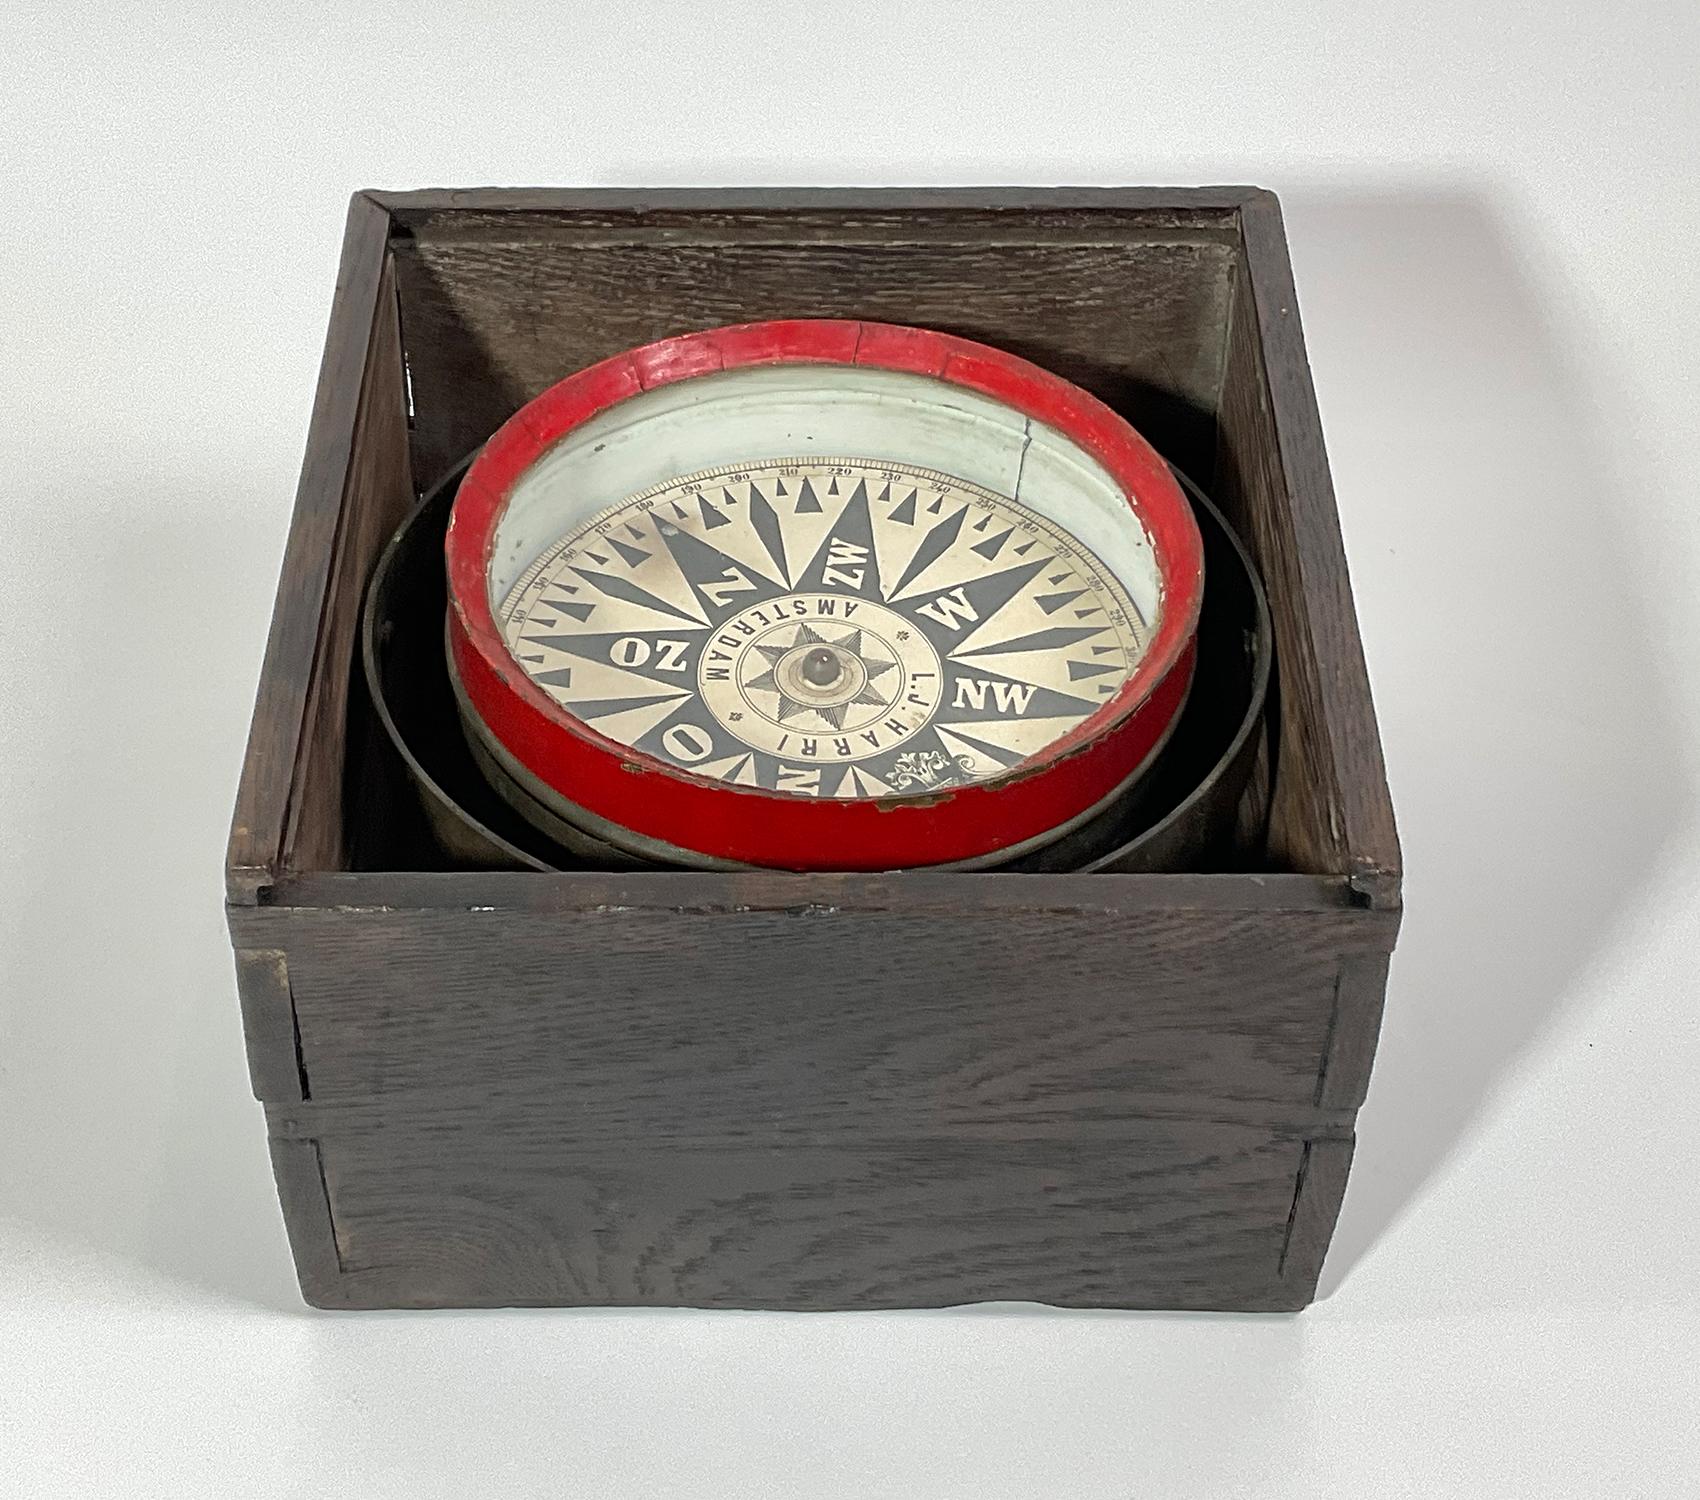 Antique ships compass with interesting Dutch lettering. Spun brass bowl with gimbal. Fitted to a primitive dovetailed box. Circa 1880. With compass card from L.J. Harri, Amsterdam.